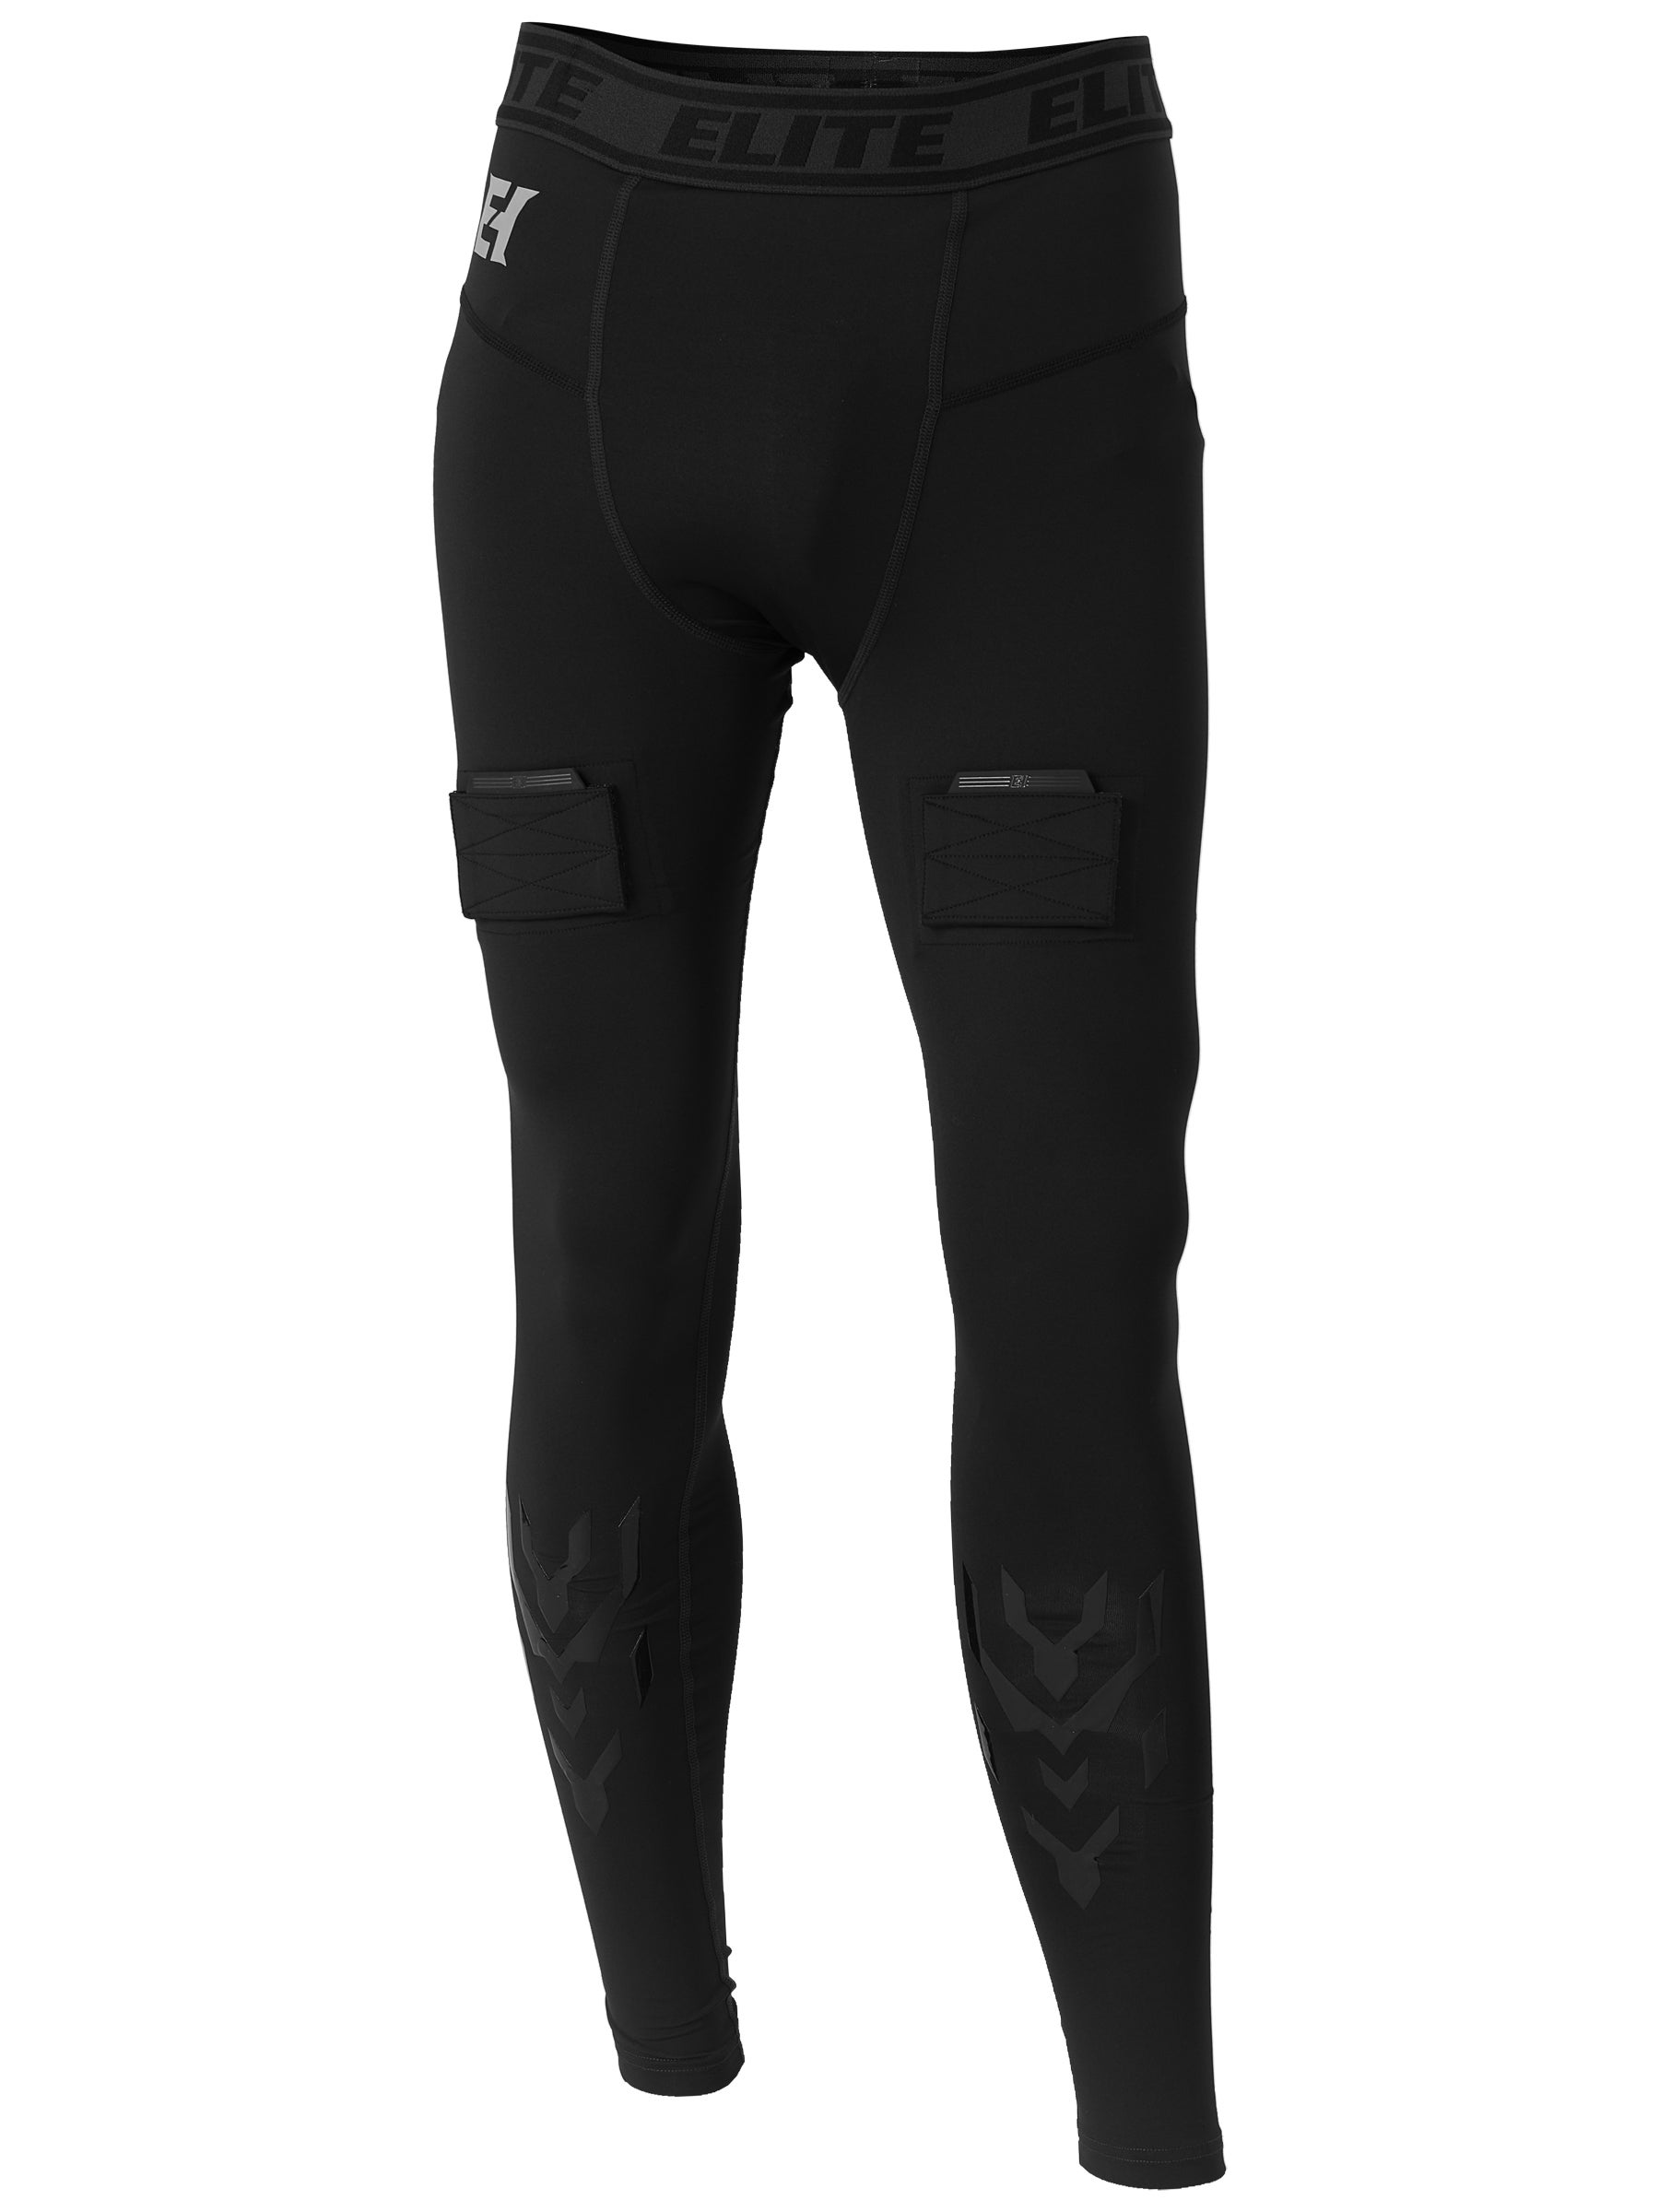 WINNWELL Youth Compression Pants with Jock,Ice Hockey,Roller Hockey,Protection 